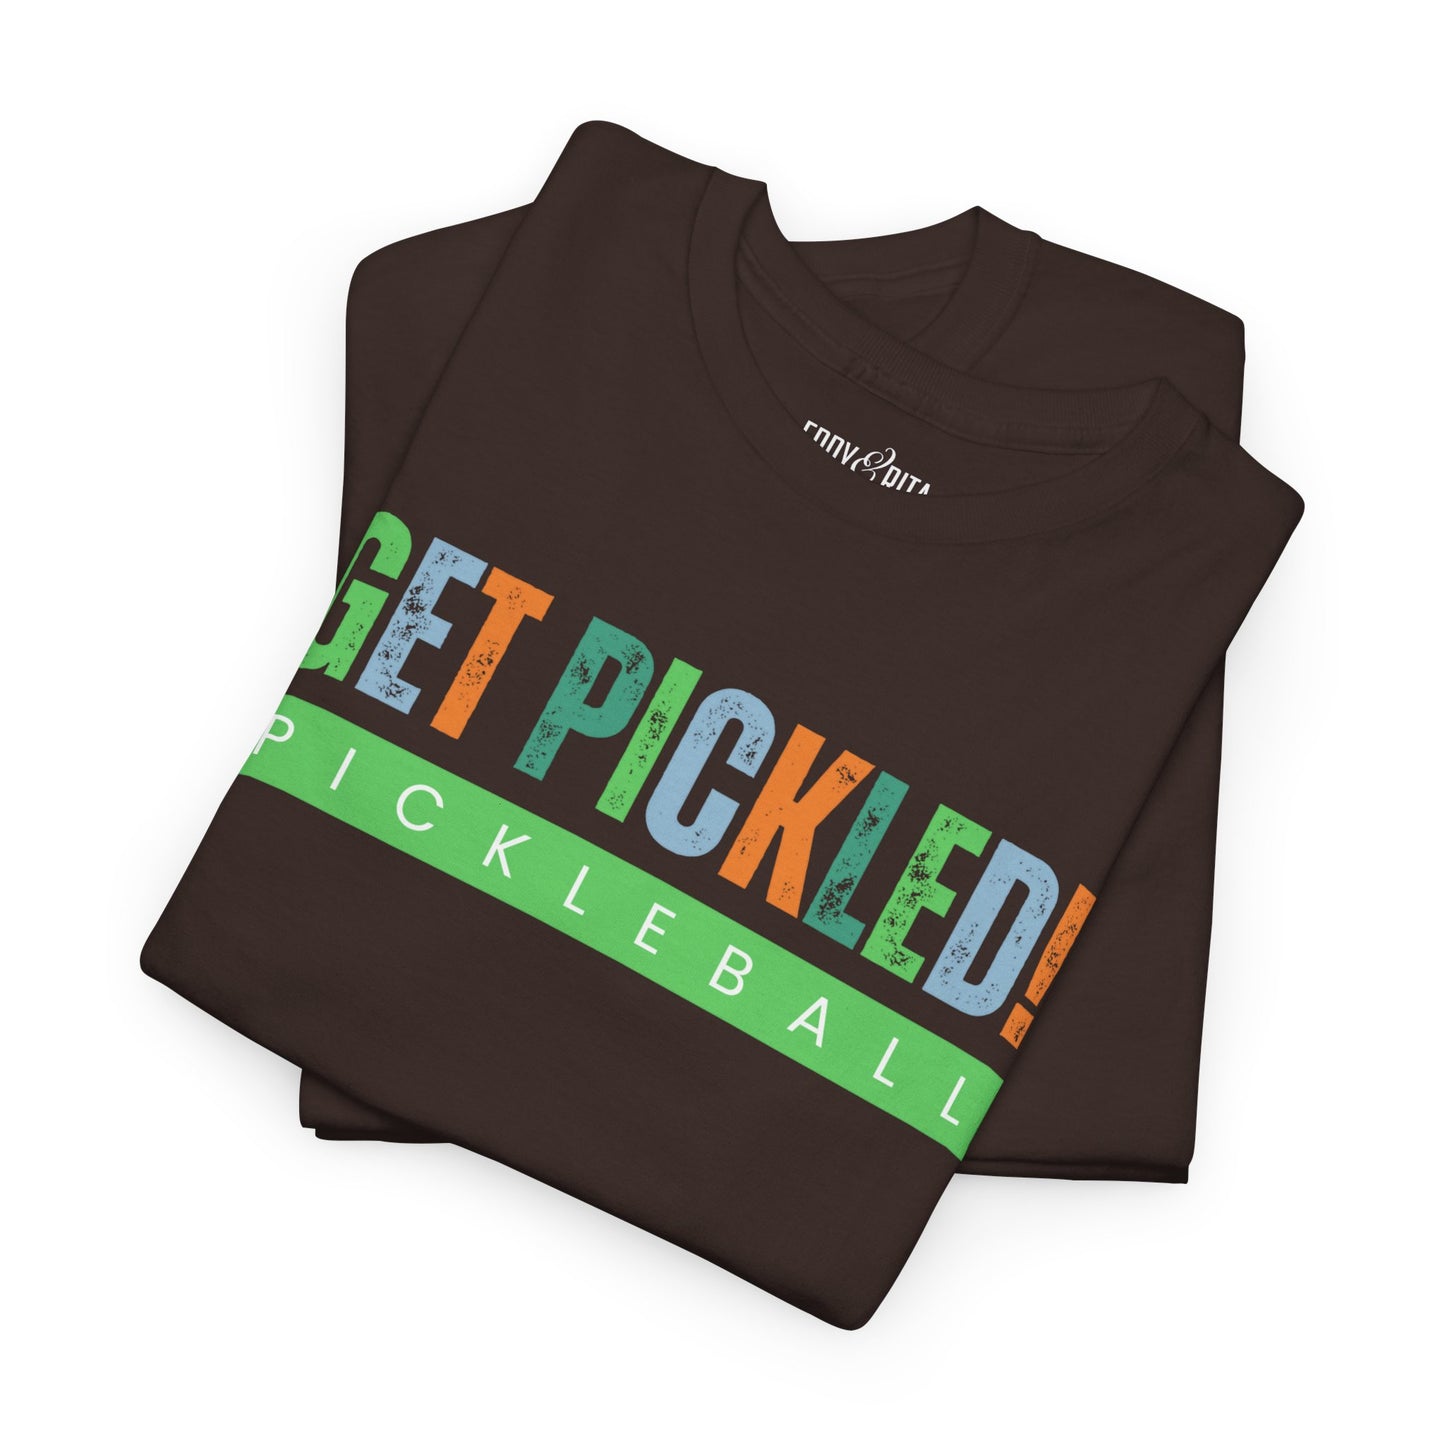 Eddy and Rita Men's Heavy Cotton T-Shirt - "Get Pickled! Pickleball" Graphic Tee for Pickleball Enthusiasts